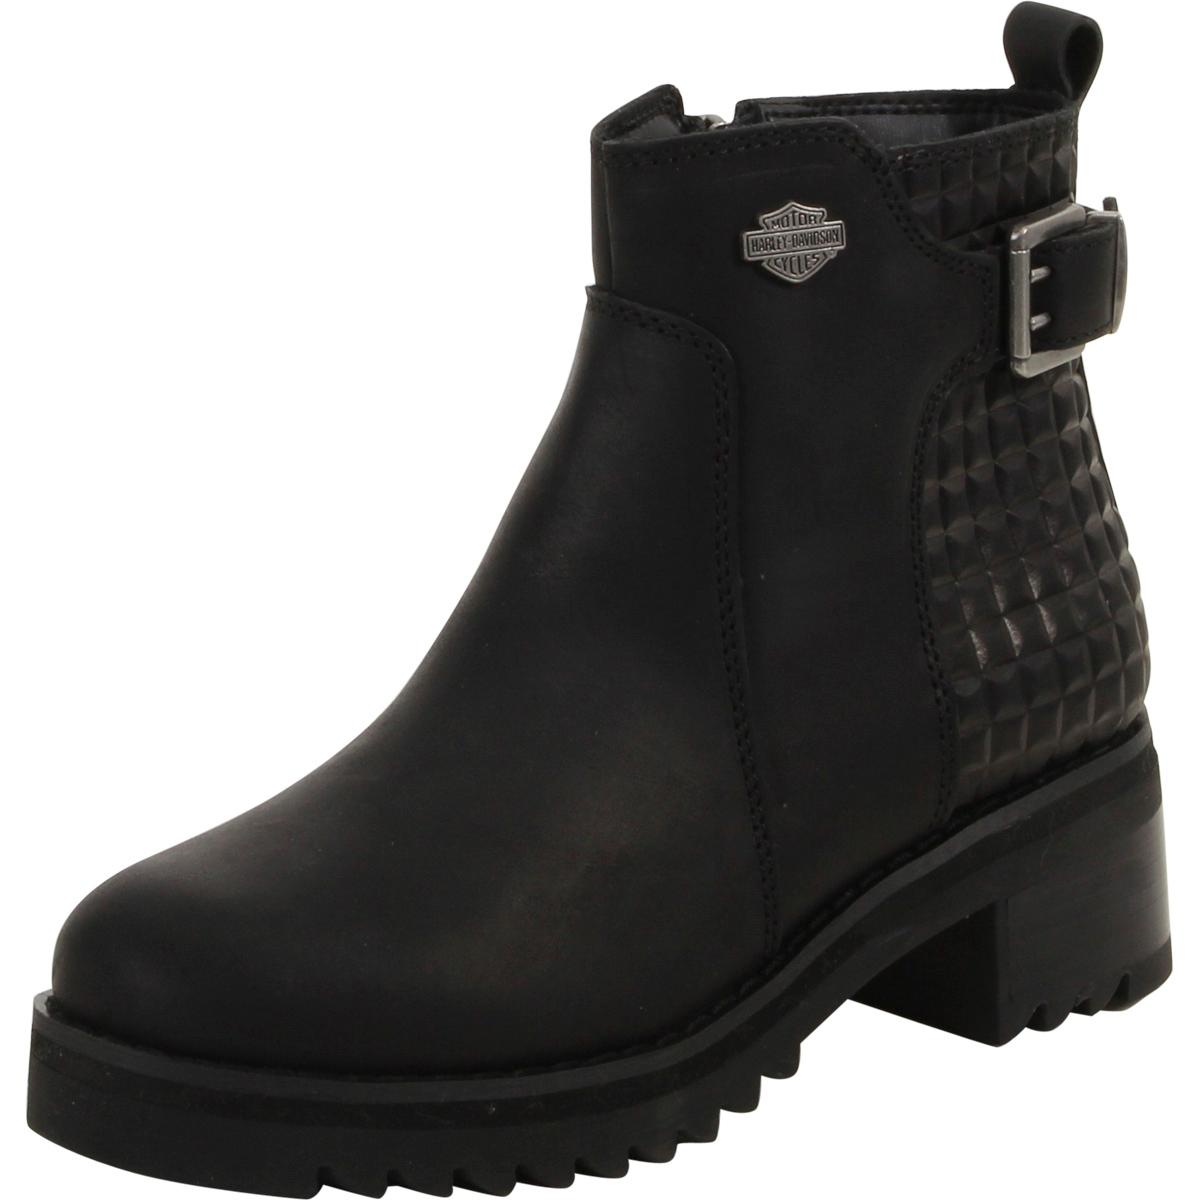 Harley Davidson Women's Kelso Textured Ankle Boots Shoes - Black - 10 D(M) US